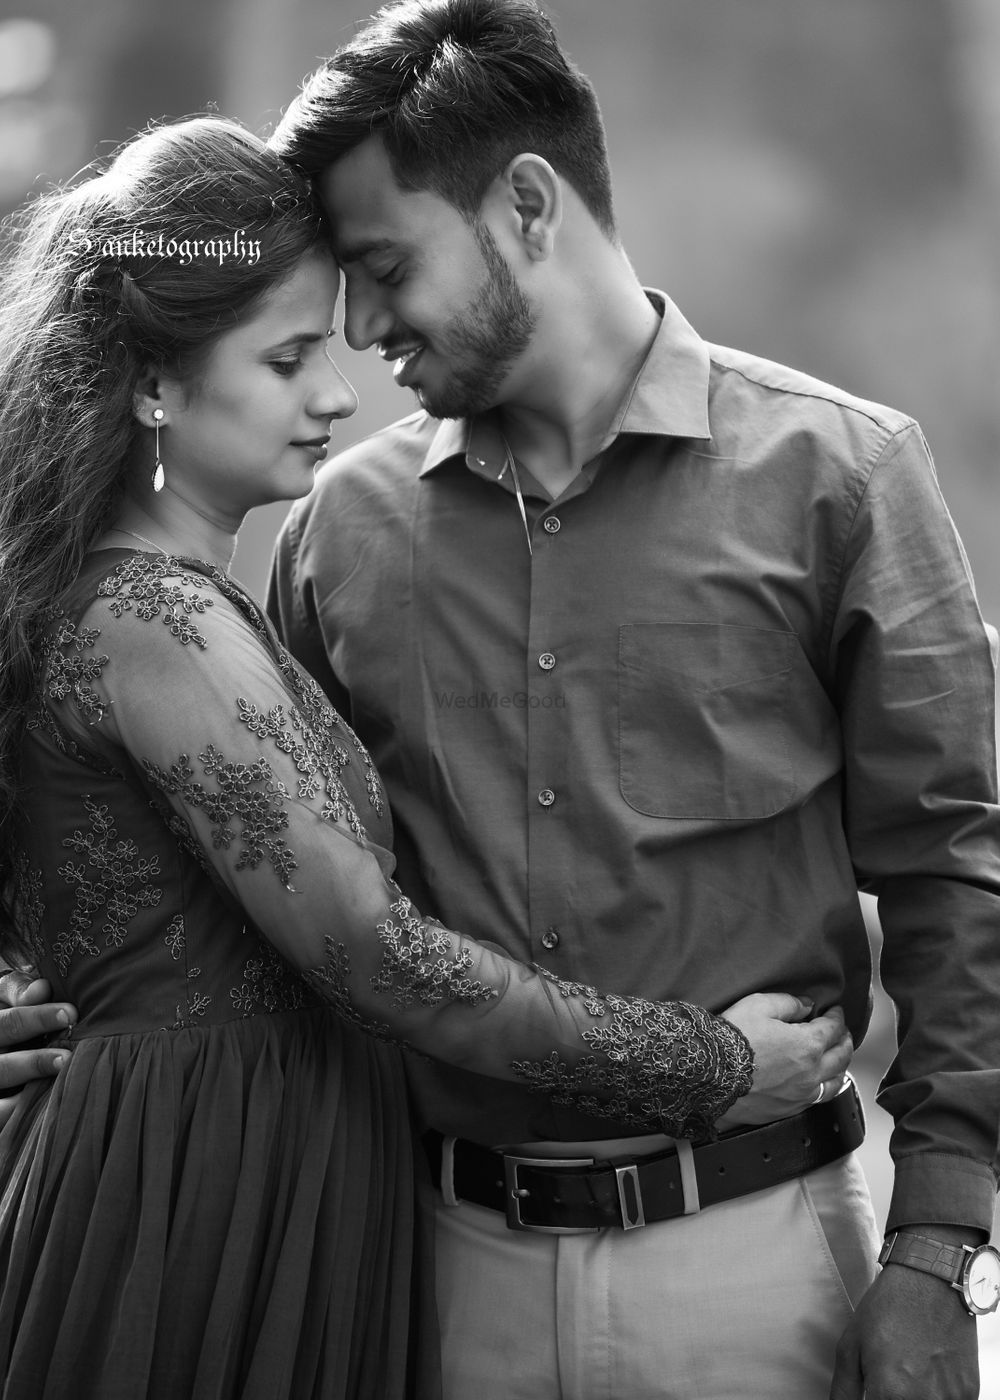 Photo From Pre-Wedding - By Sanketography